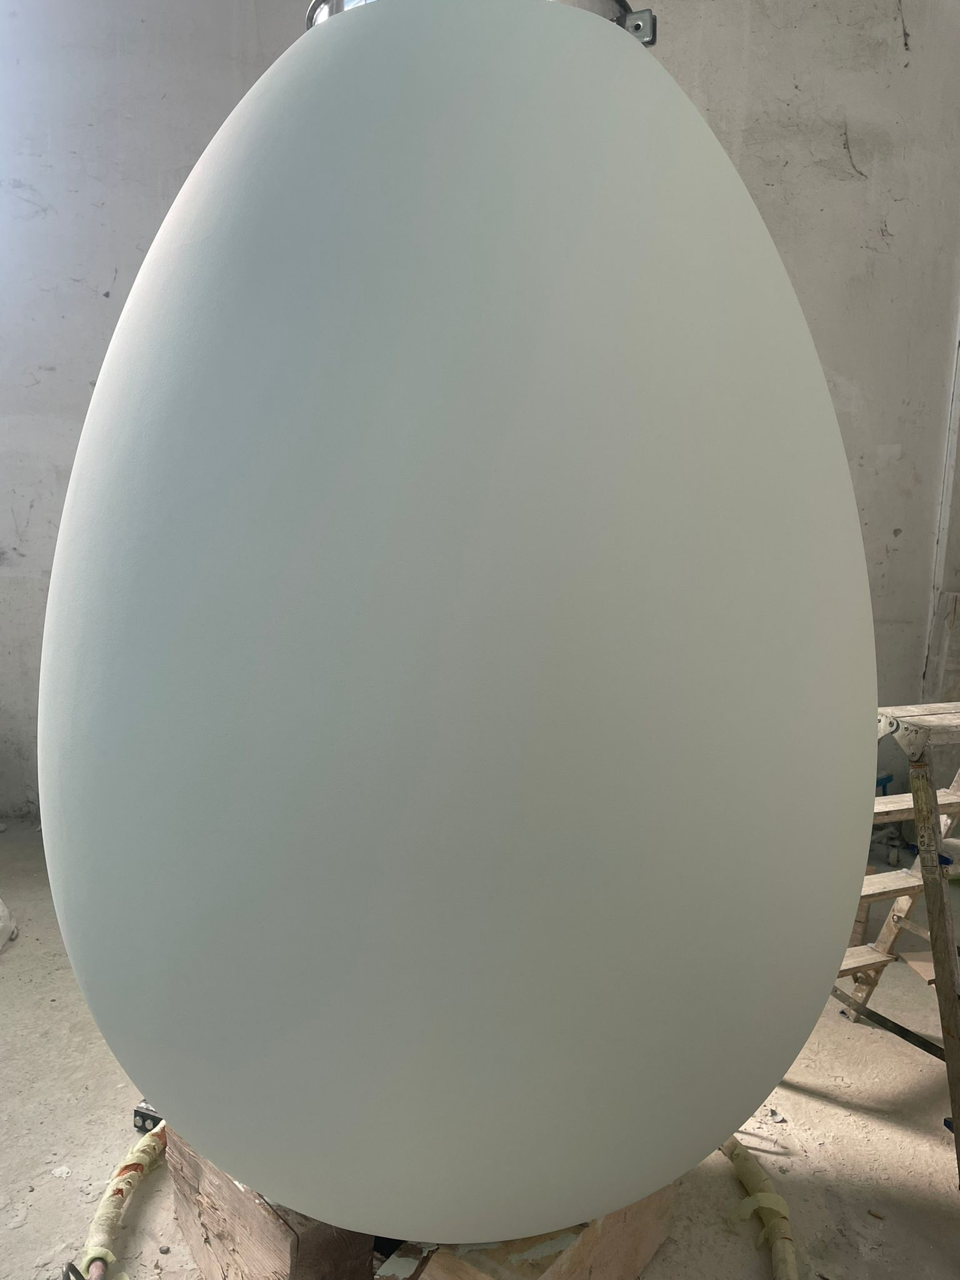 The Wine Egg Proyect